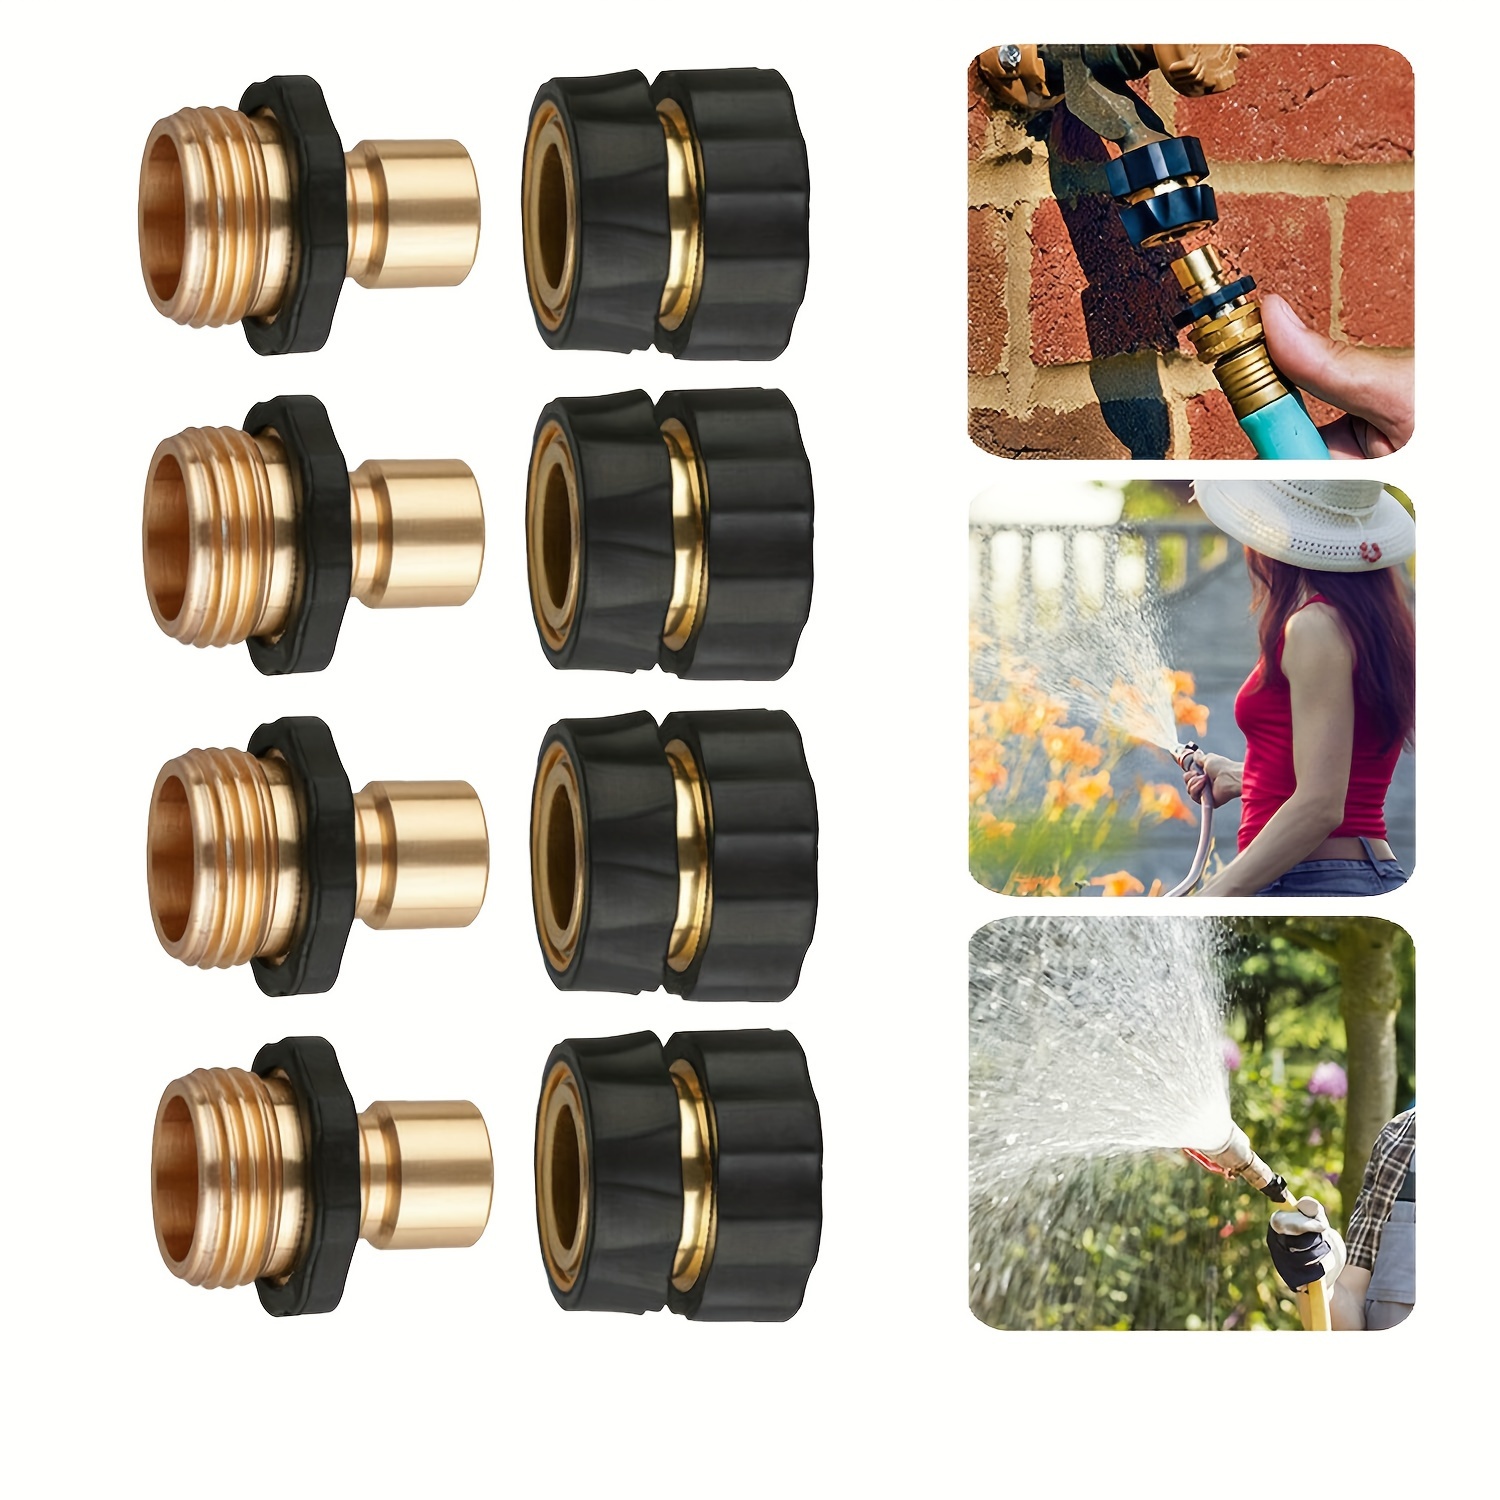 2 Sets/4 Sets, Garden Hose Quick Connector, 3/4 GHT Thread Fitting Water  Pipe Quick Connect Set, No-Leak Rust Resistant Aluminum Male And Female Fitt